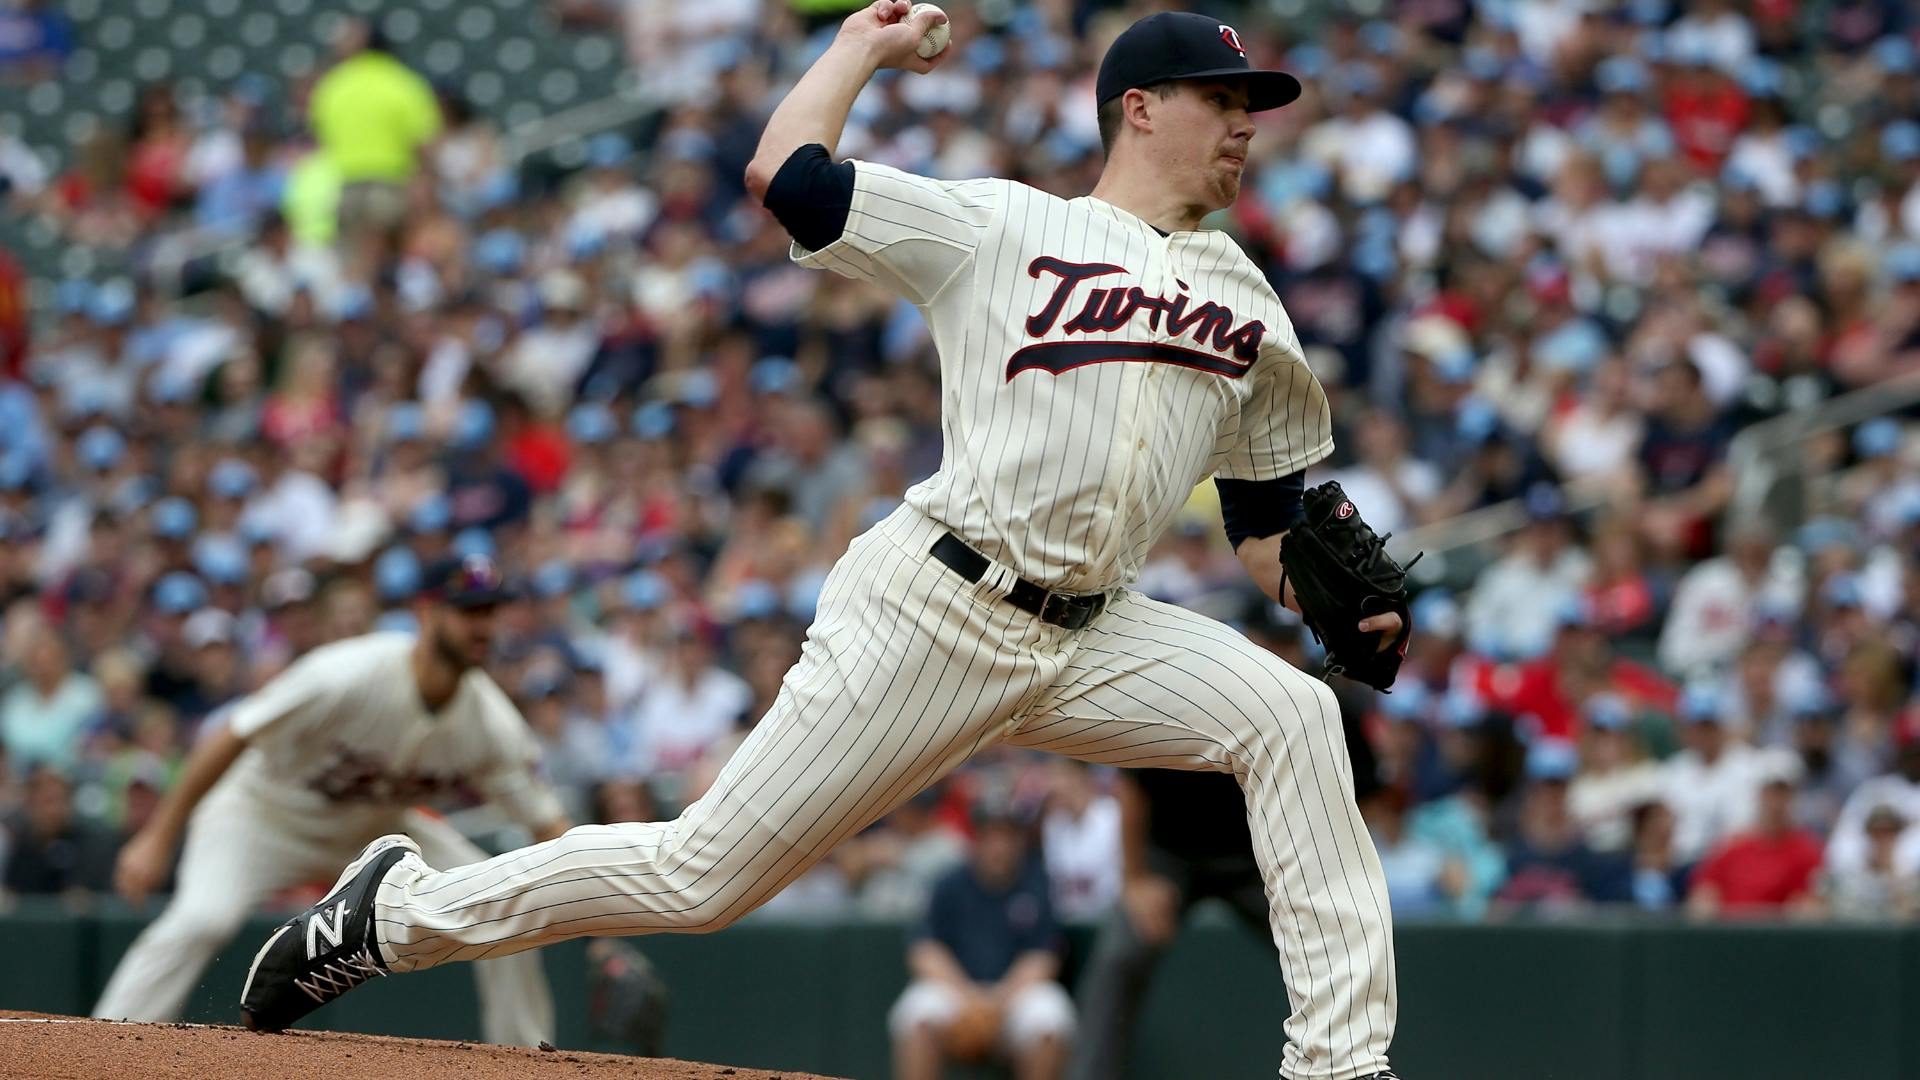 Twins righthander sets career highs in innings pitched and pitches thrown on Saturday.